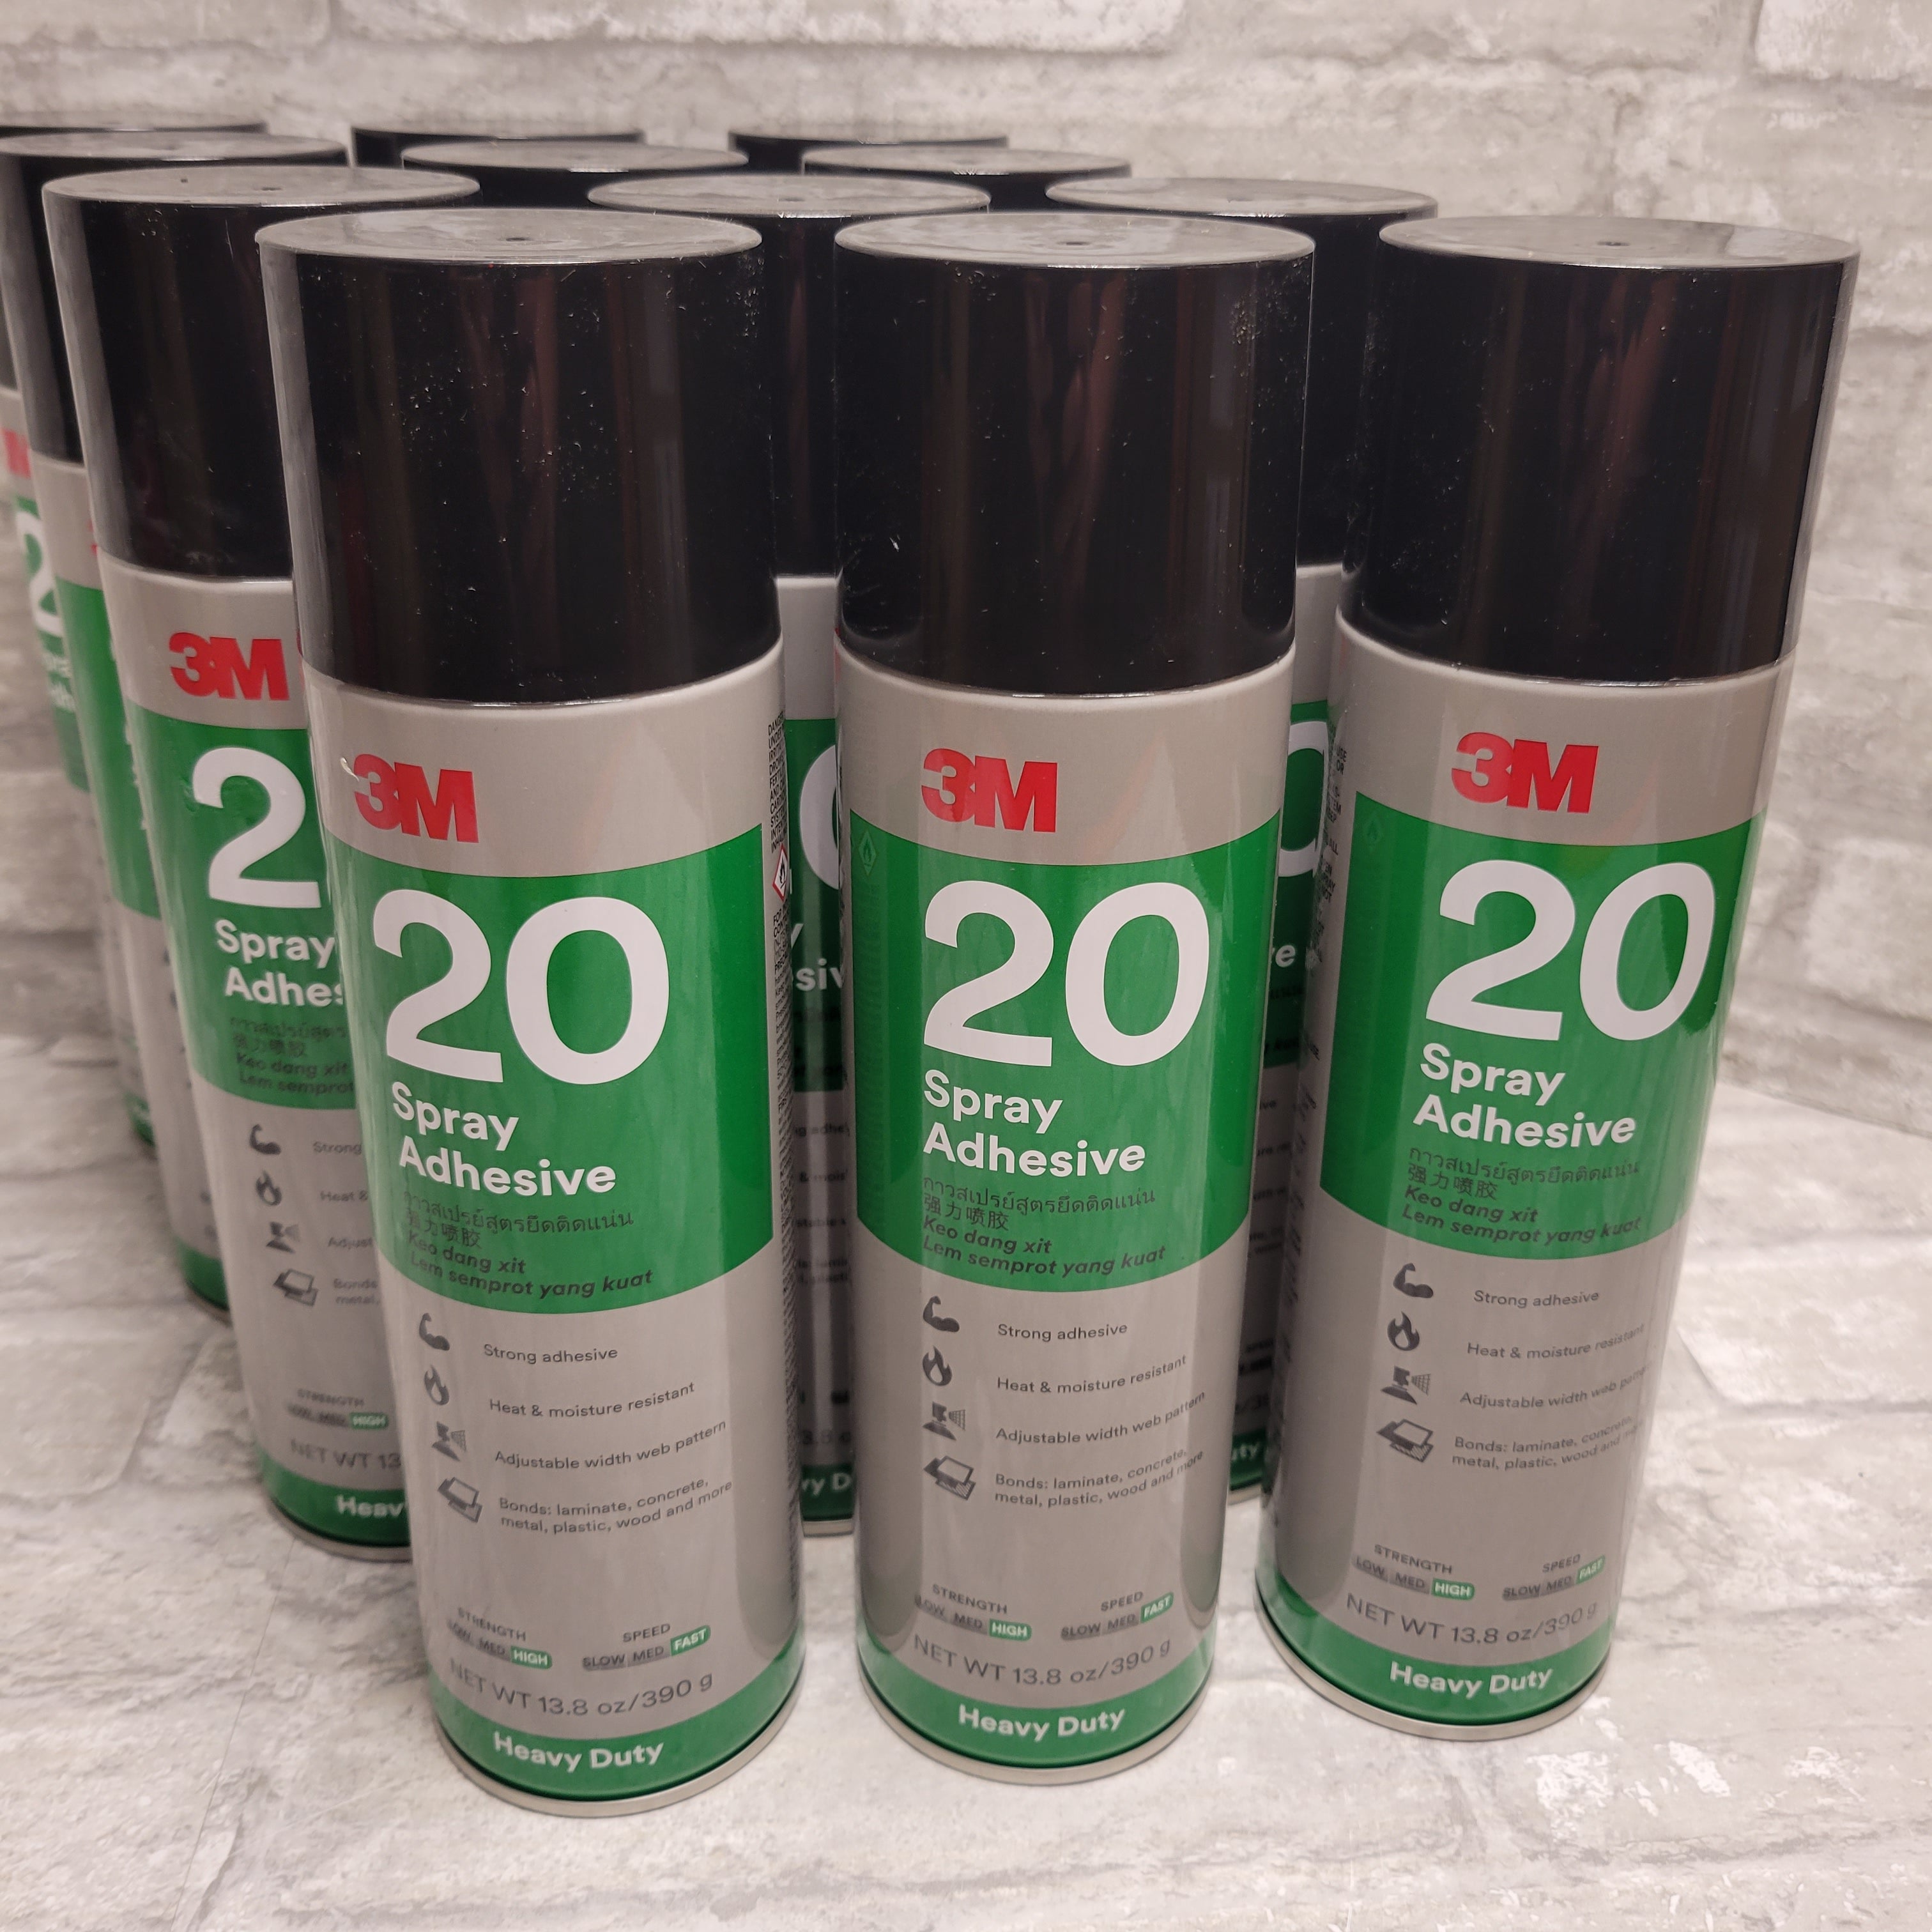 3M Heavy Duty 20 Spray Adhesive Clear, Net Weight 13.75 oz, 12 Pack (8150490775790)